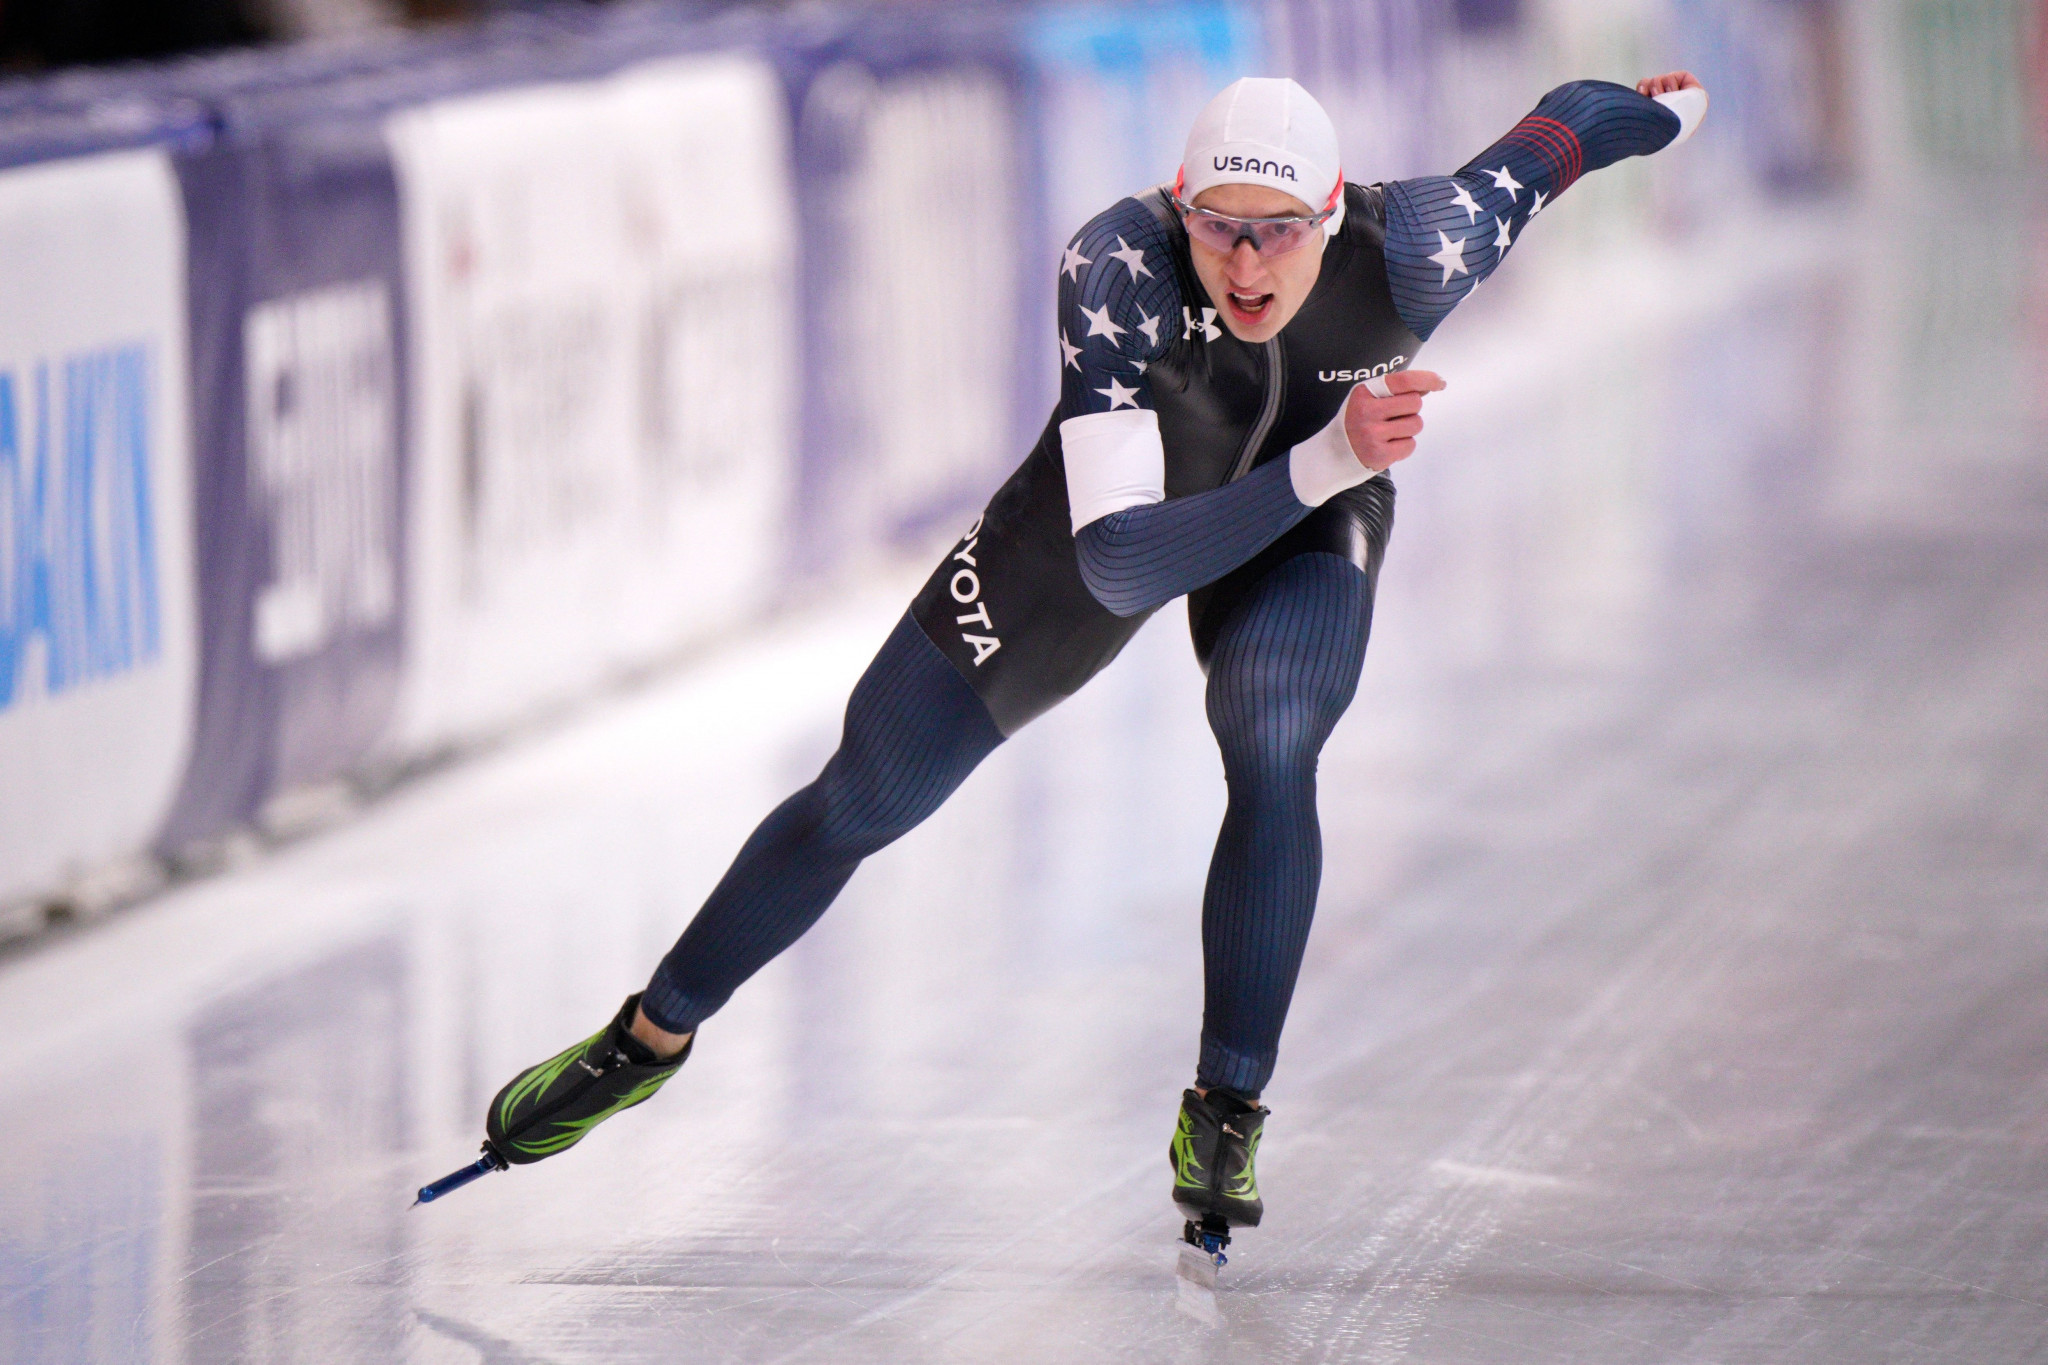 Jordan Stolz won five golds earlier this year at the Junior World Championships, and has transferred his form to senior level in Heerenveen ©Getty Images